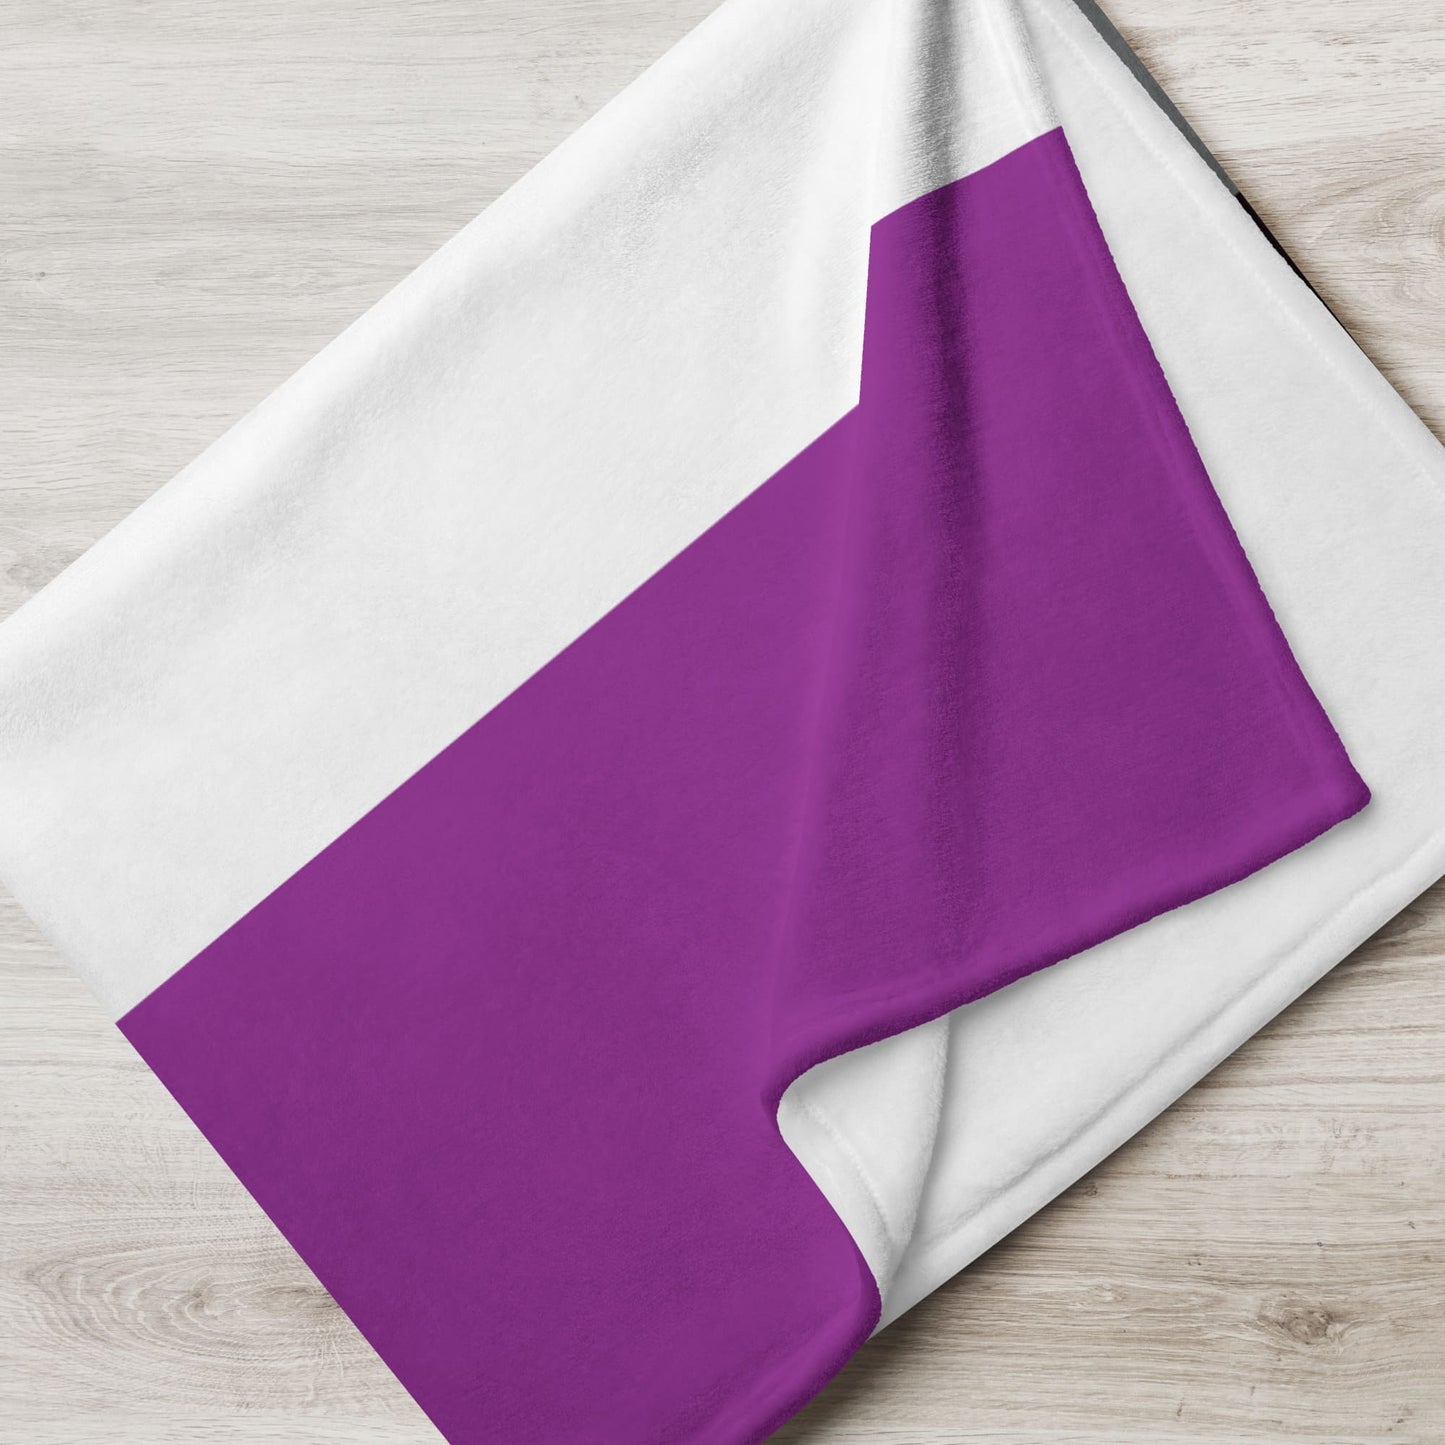 asexual blanket folded2